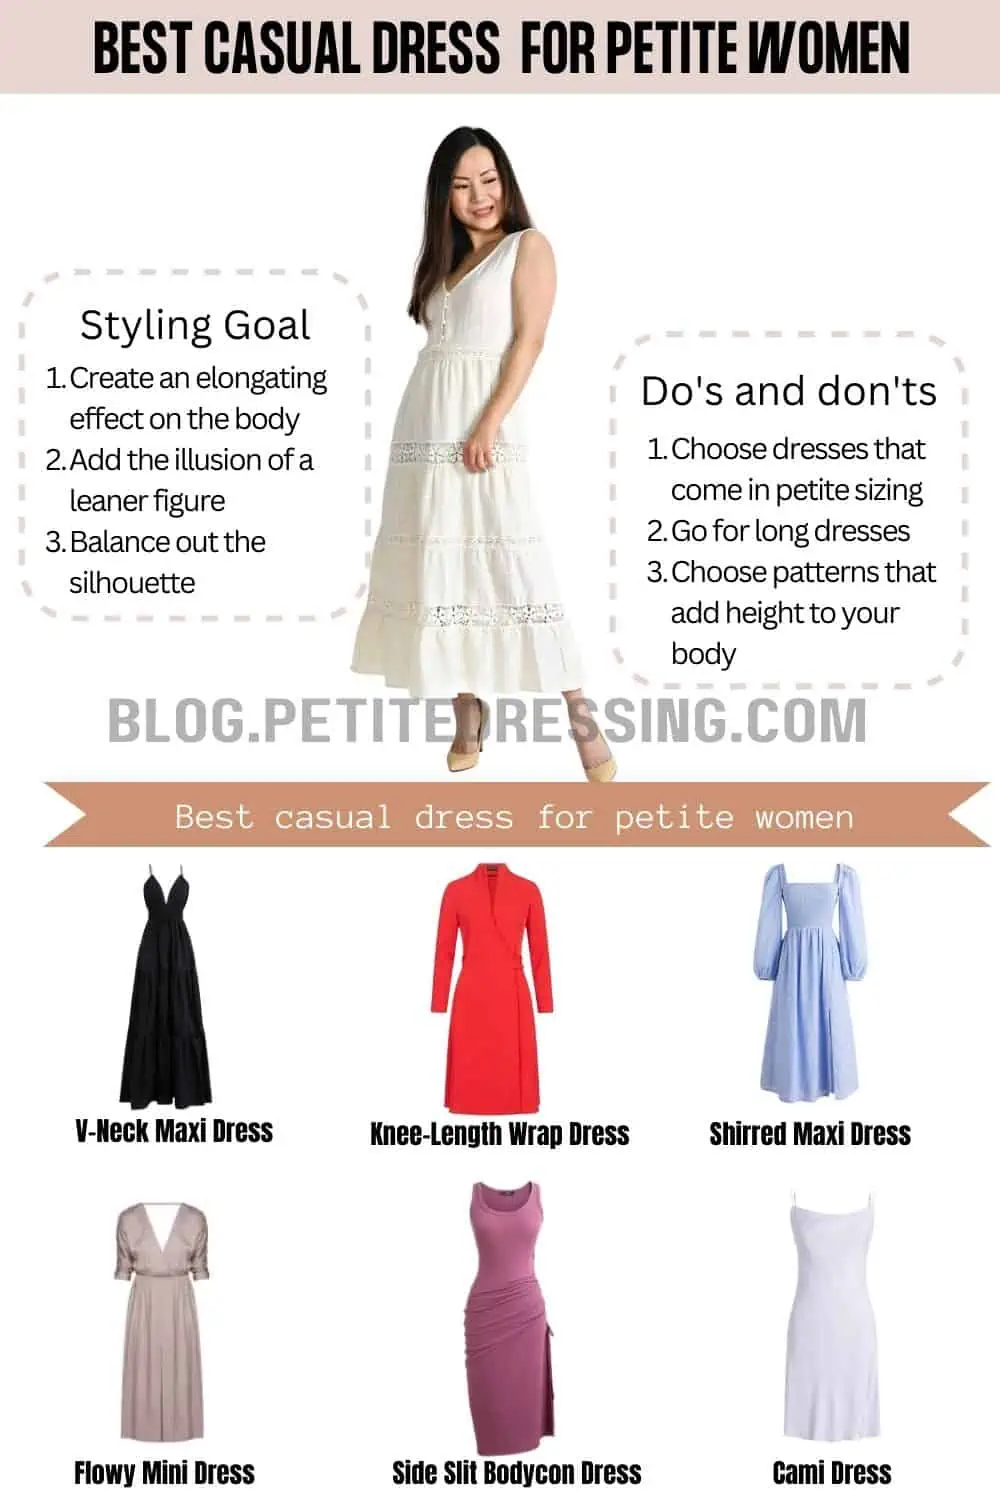 I'm 5'2, here's the Complete Casual Dress Guide for Petite Women - Petite  Dressing